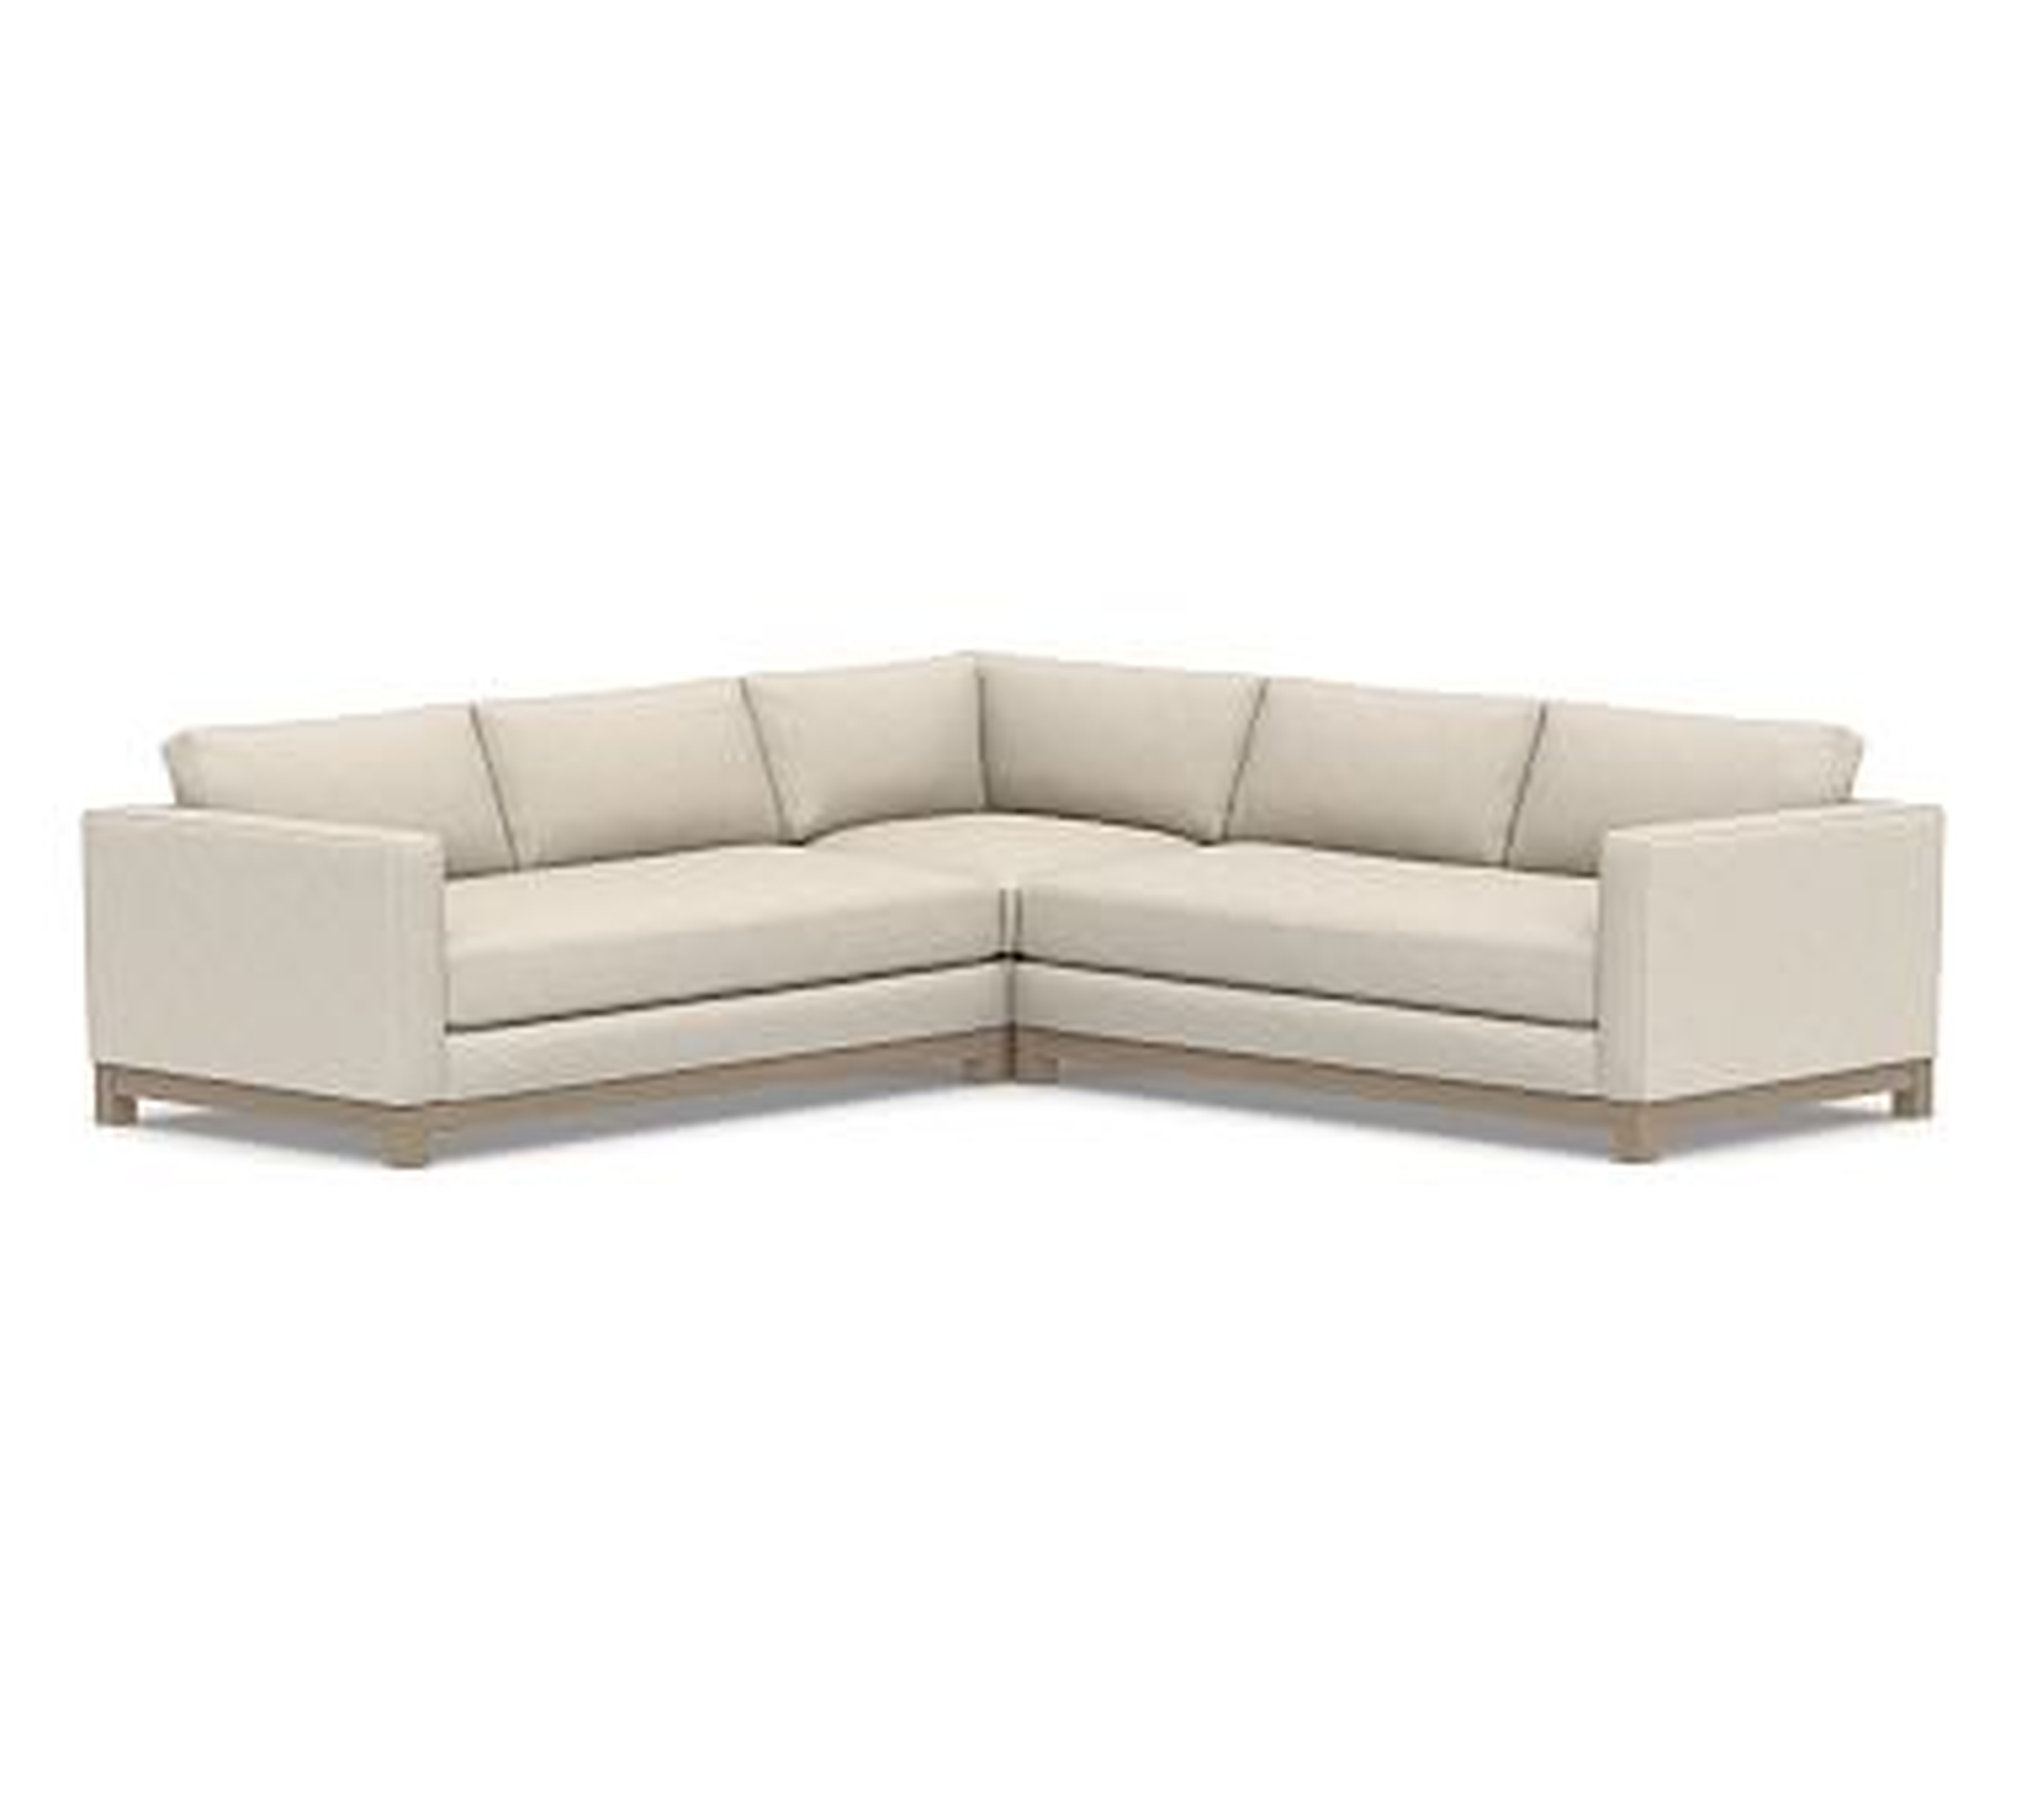 Jake Upholstered 3-Piece L-Shaped Corner Sectional 2x1, Wood Legs, Polyester Wrapped Cushions, Performance Slub Cotton Stone - Pottery Barn